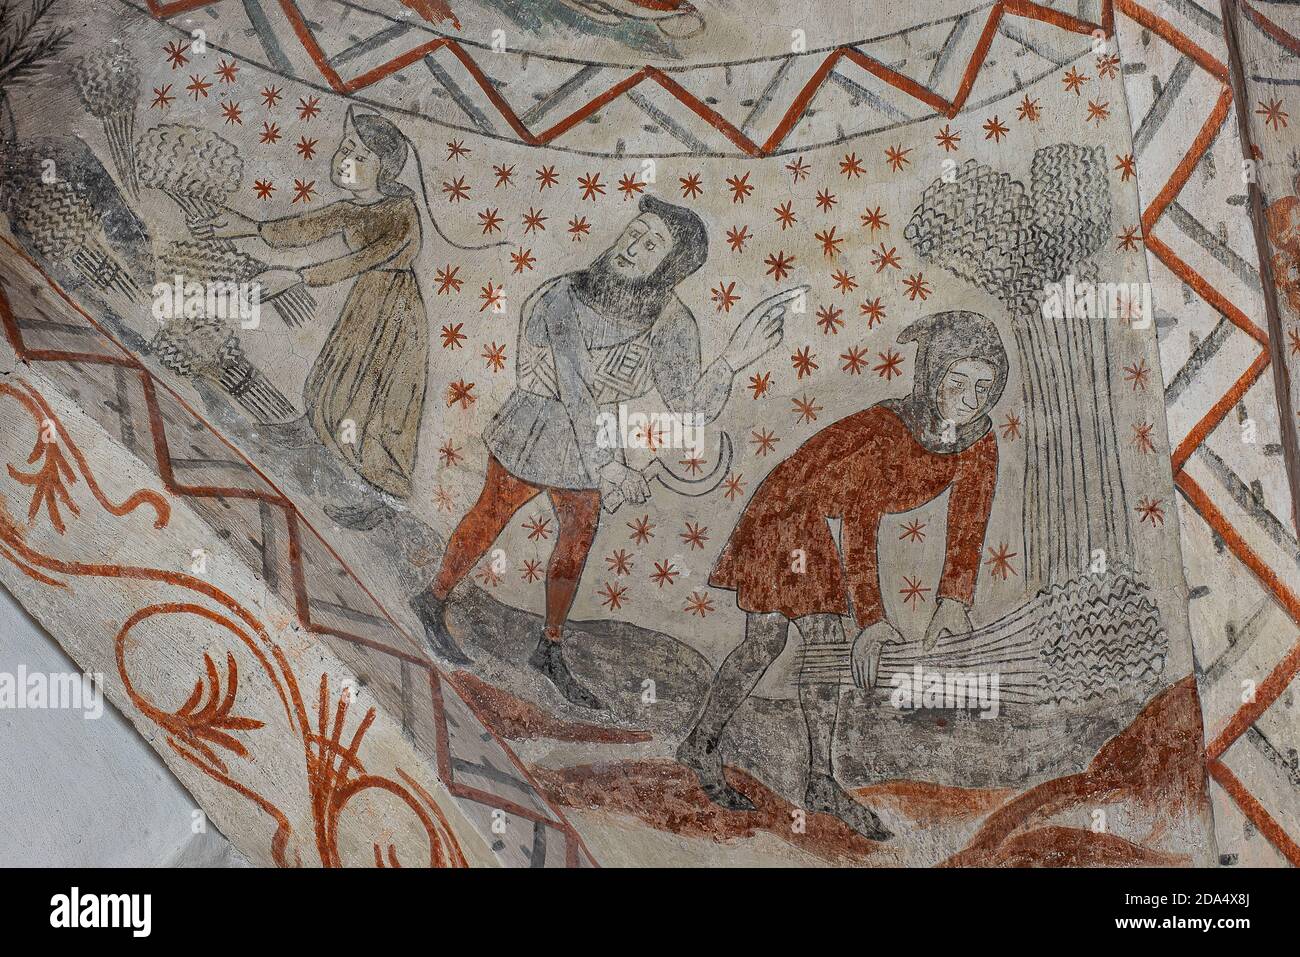 harvesting the self-growing corn, a medieval legend on a wall-painting in Tuse church, Denmark, July 16, 2020 Stock Photo